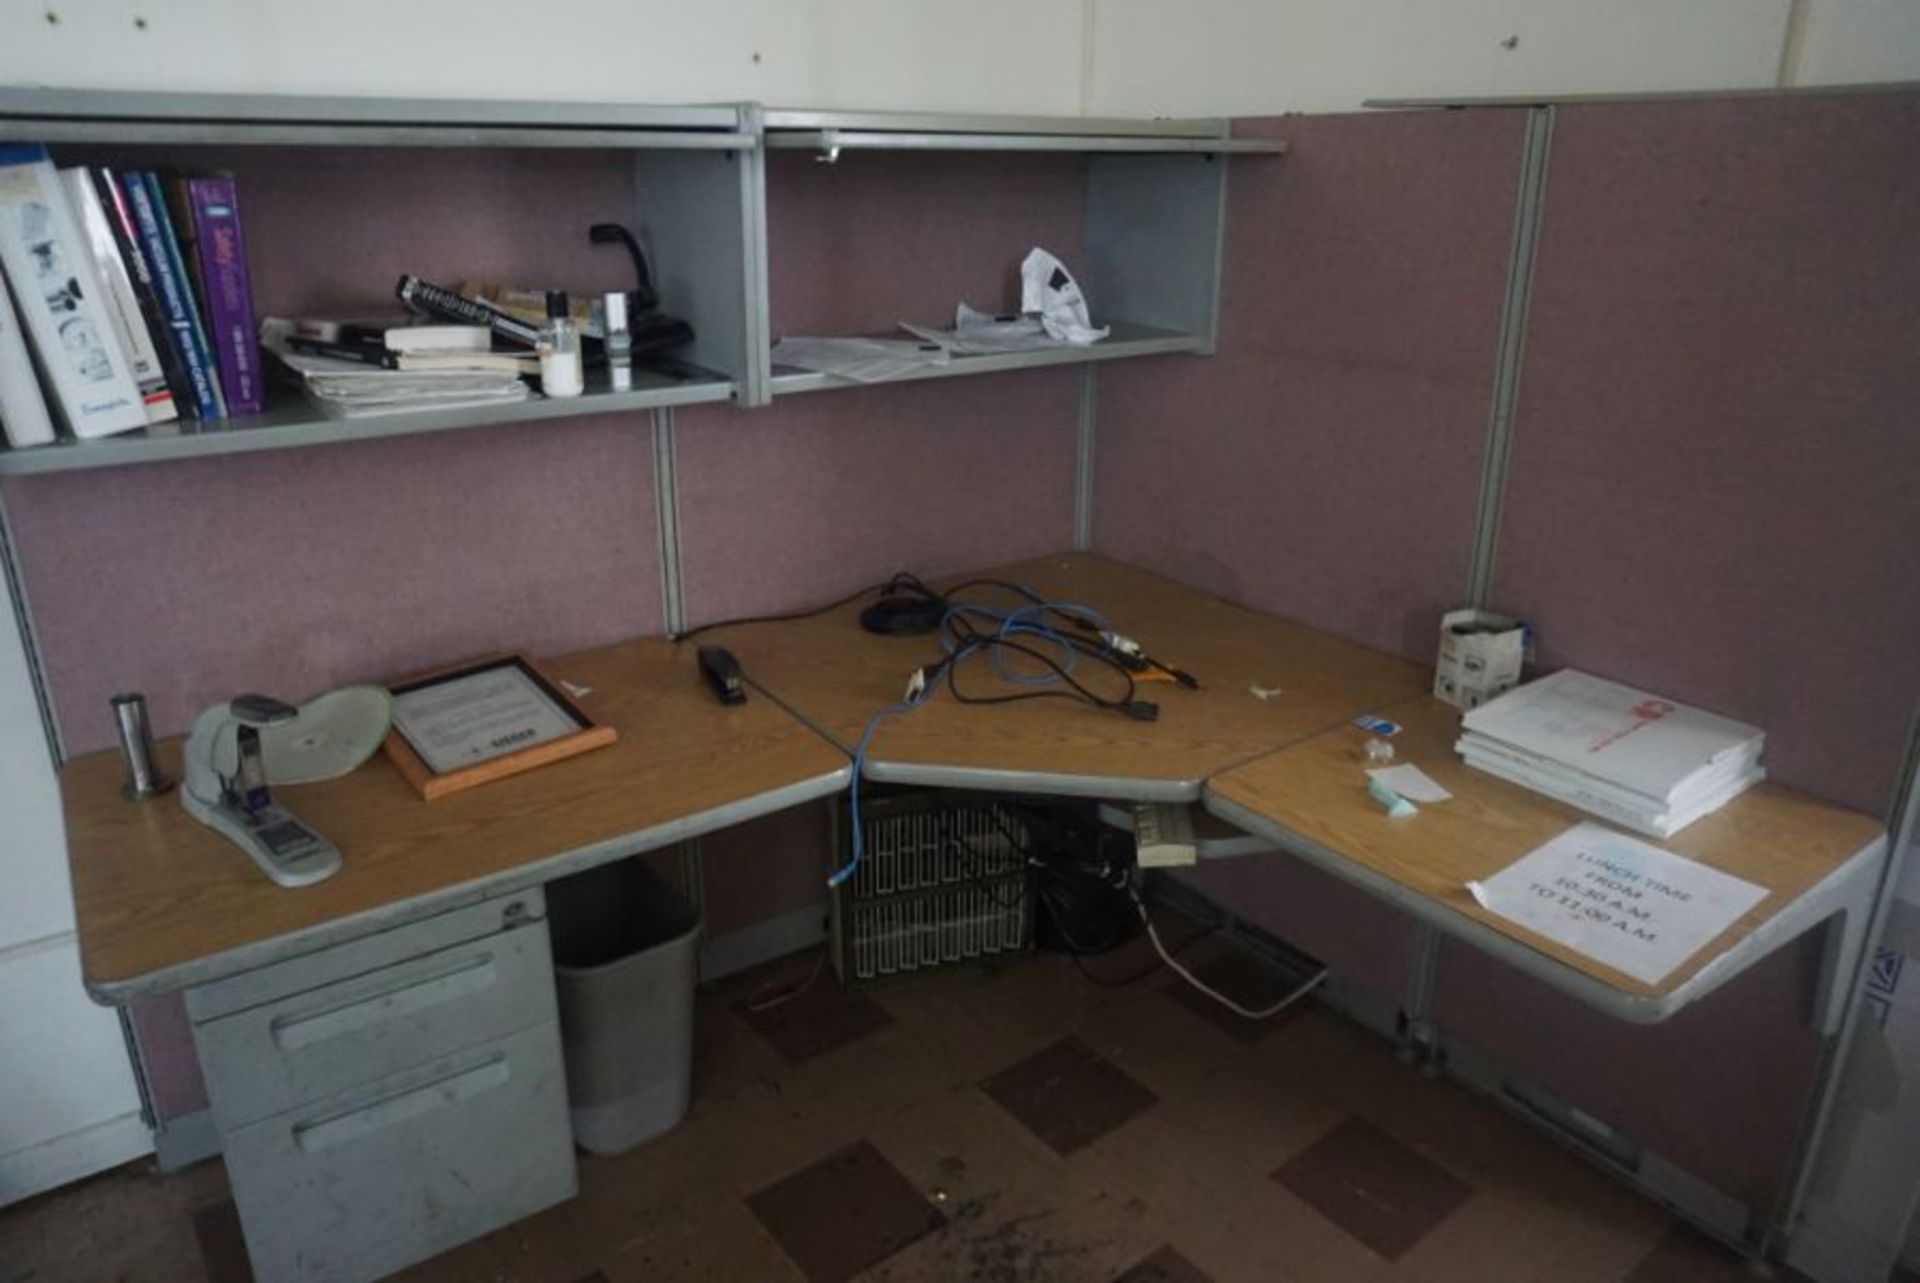 Office Desk and File Cabinets - Image 3 of 3